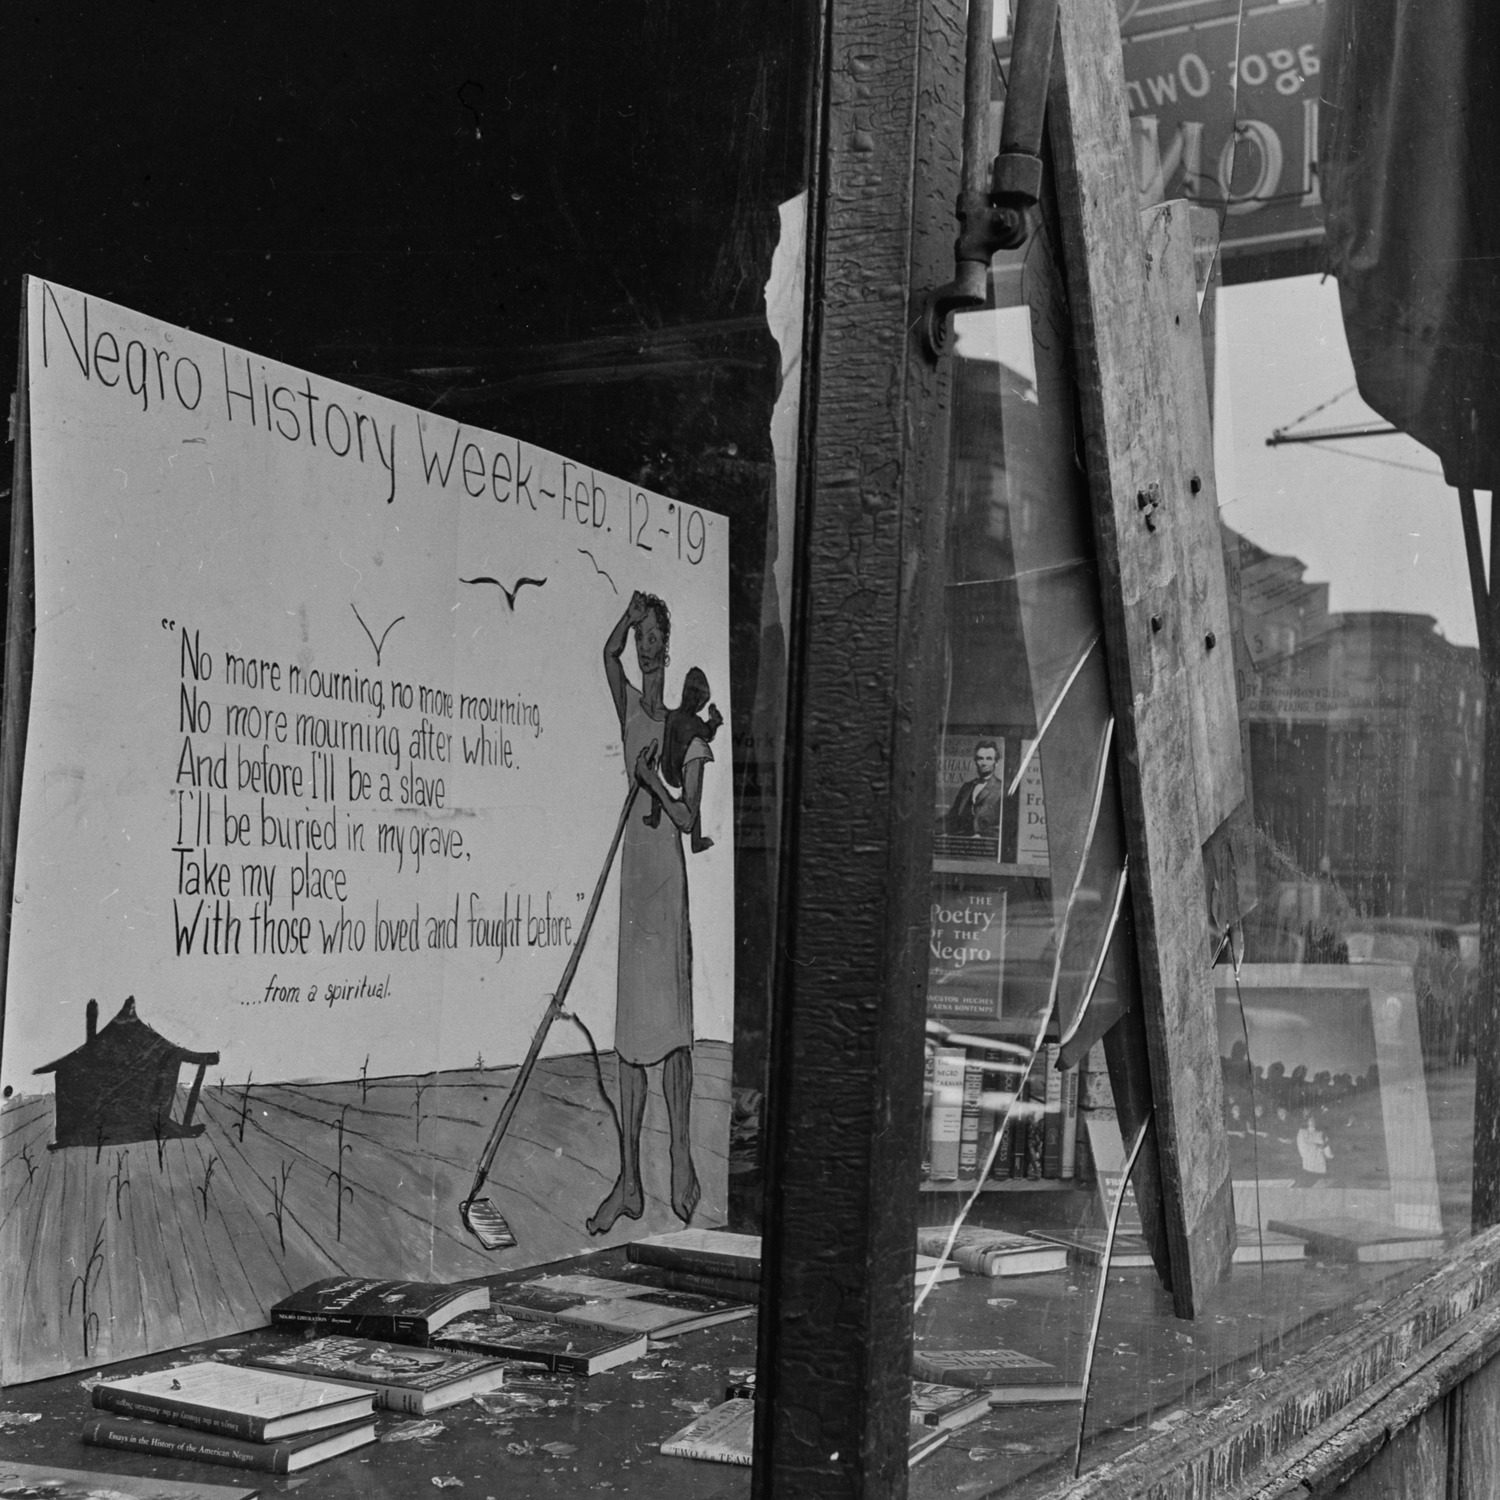 Sign for 'Negro History Week' in the storefront window of Community Book Shop owned by Joan Place at 1404 East 55th Street, in the Hyde Park neighborhood of Chicago, 1951